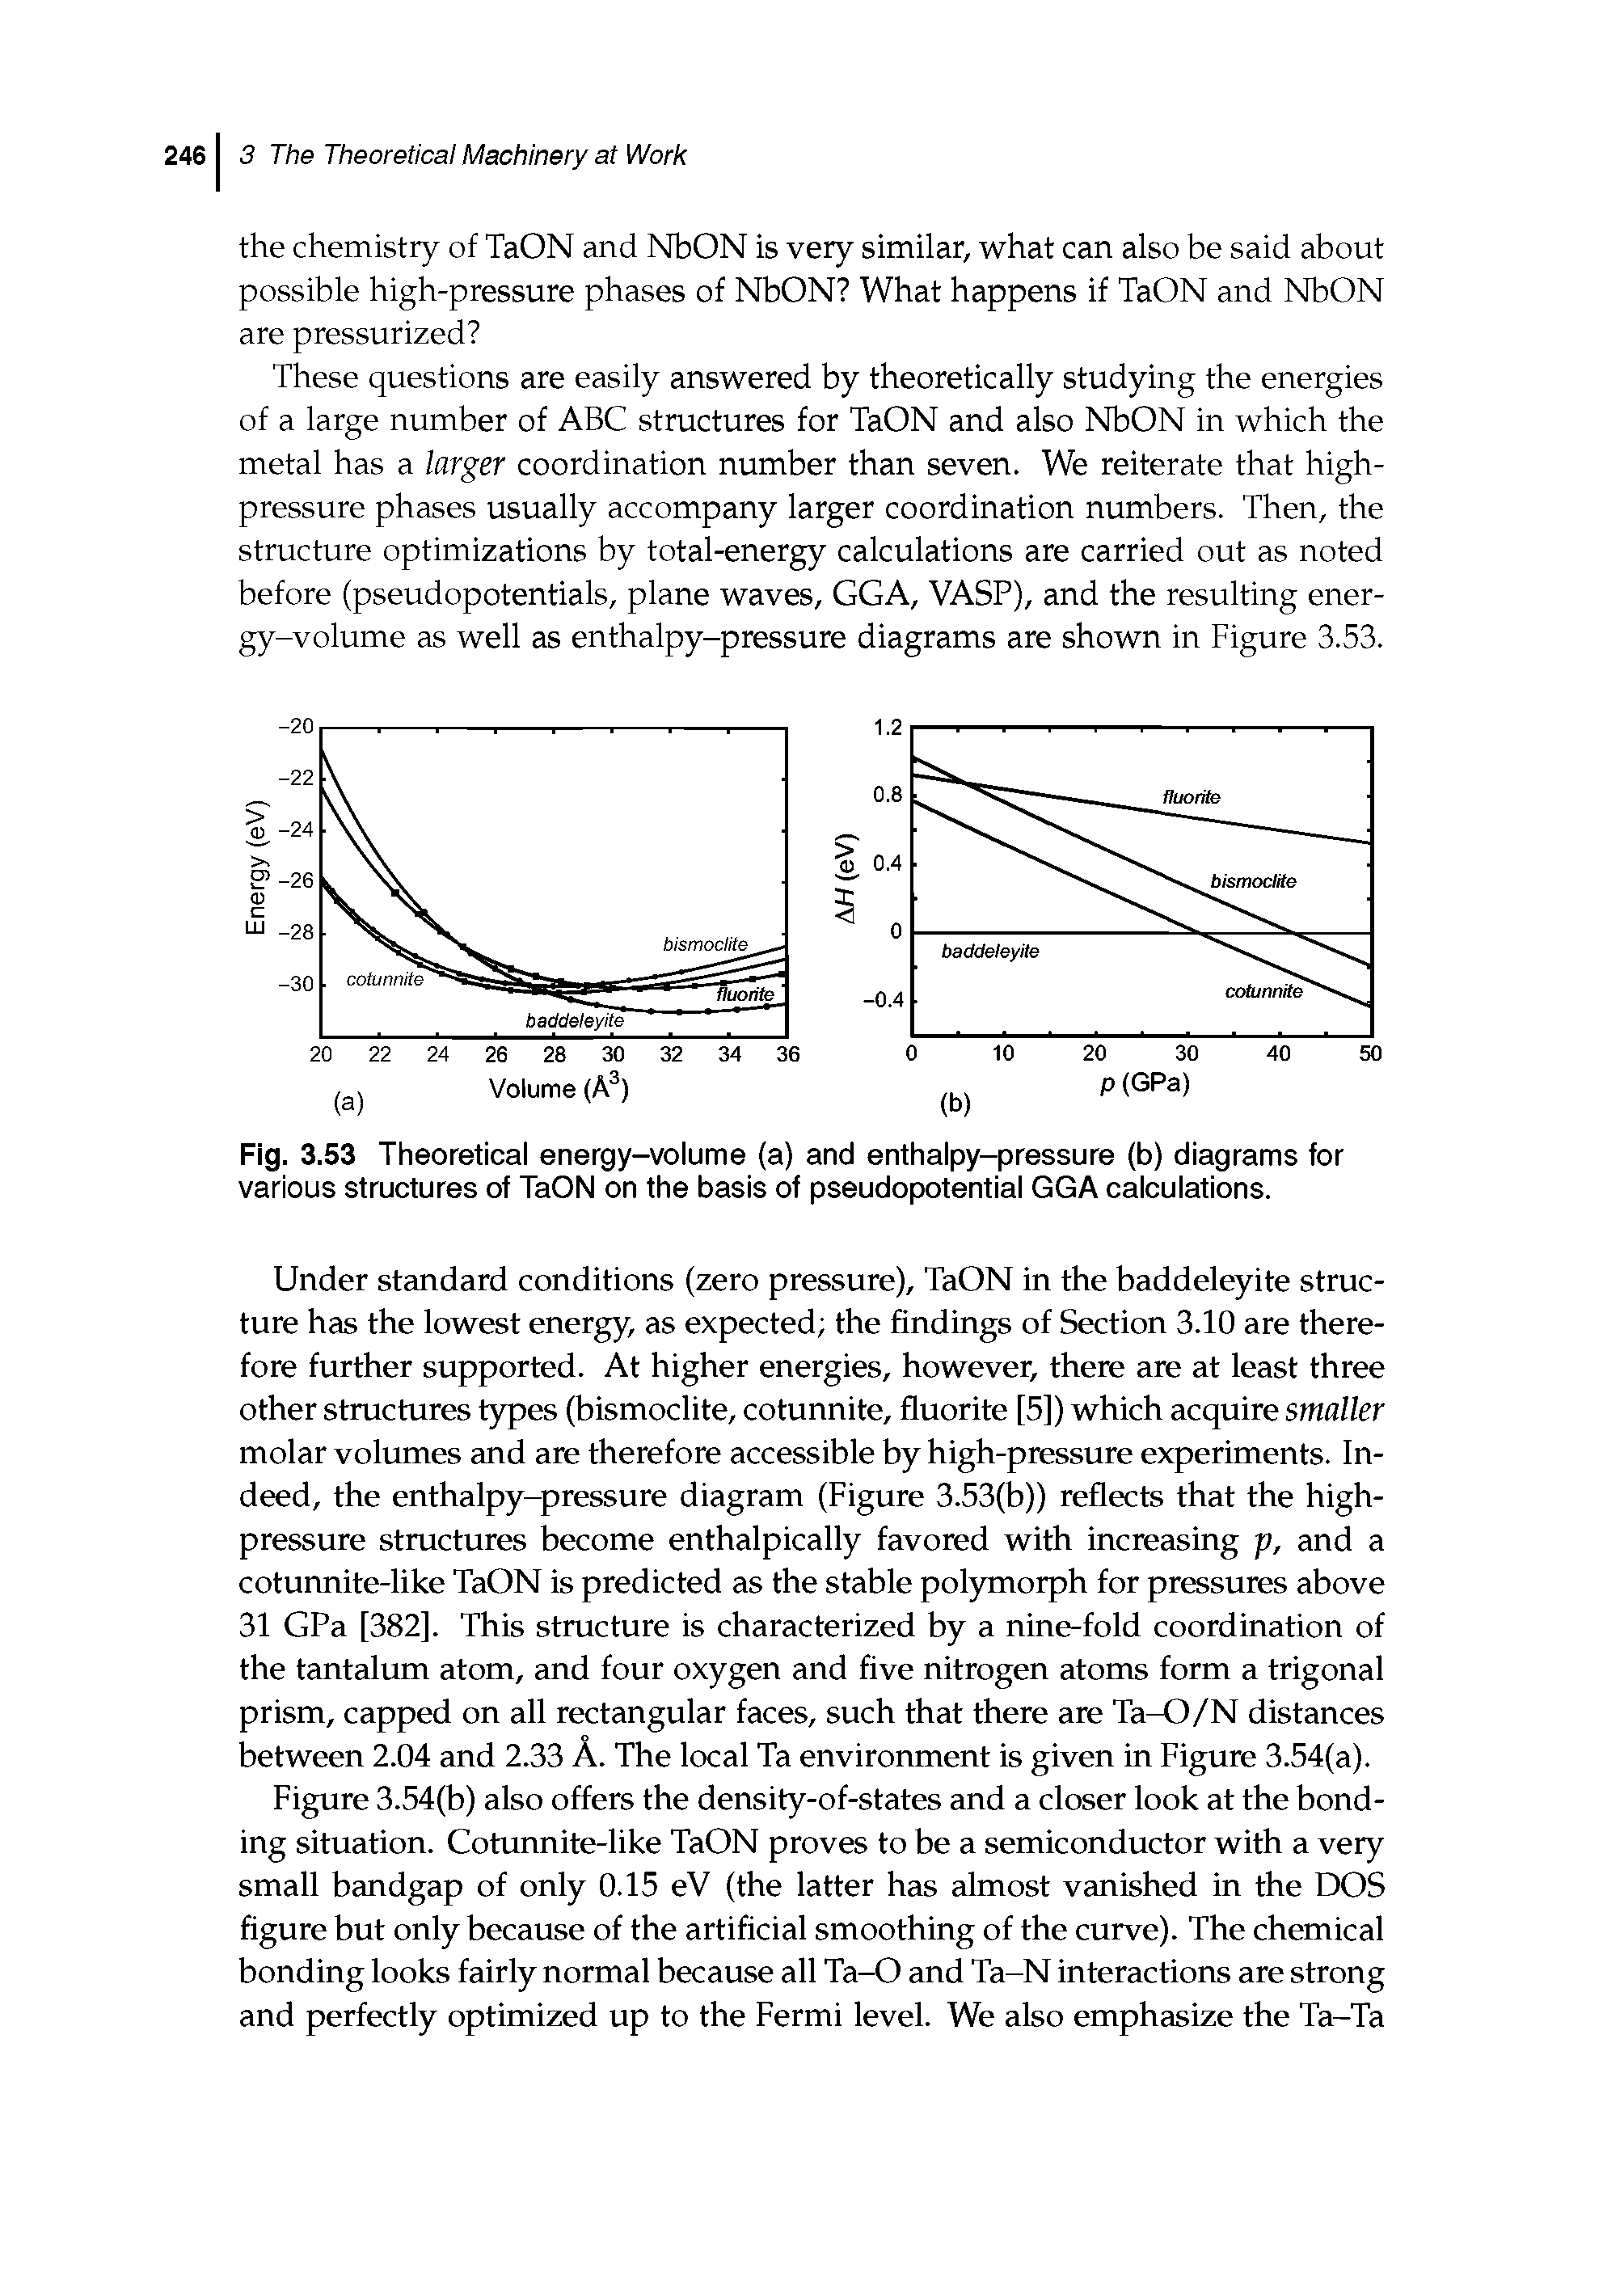 Fig. 3.53 Theoretical energy-volume (a) and enthalpy-pressure (b) diagrams for various structures of TaON on the basis of pseudopotential GGA calculations.